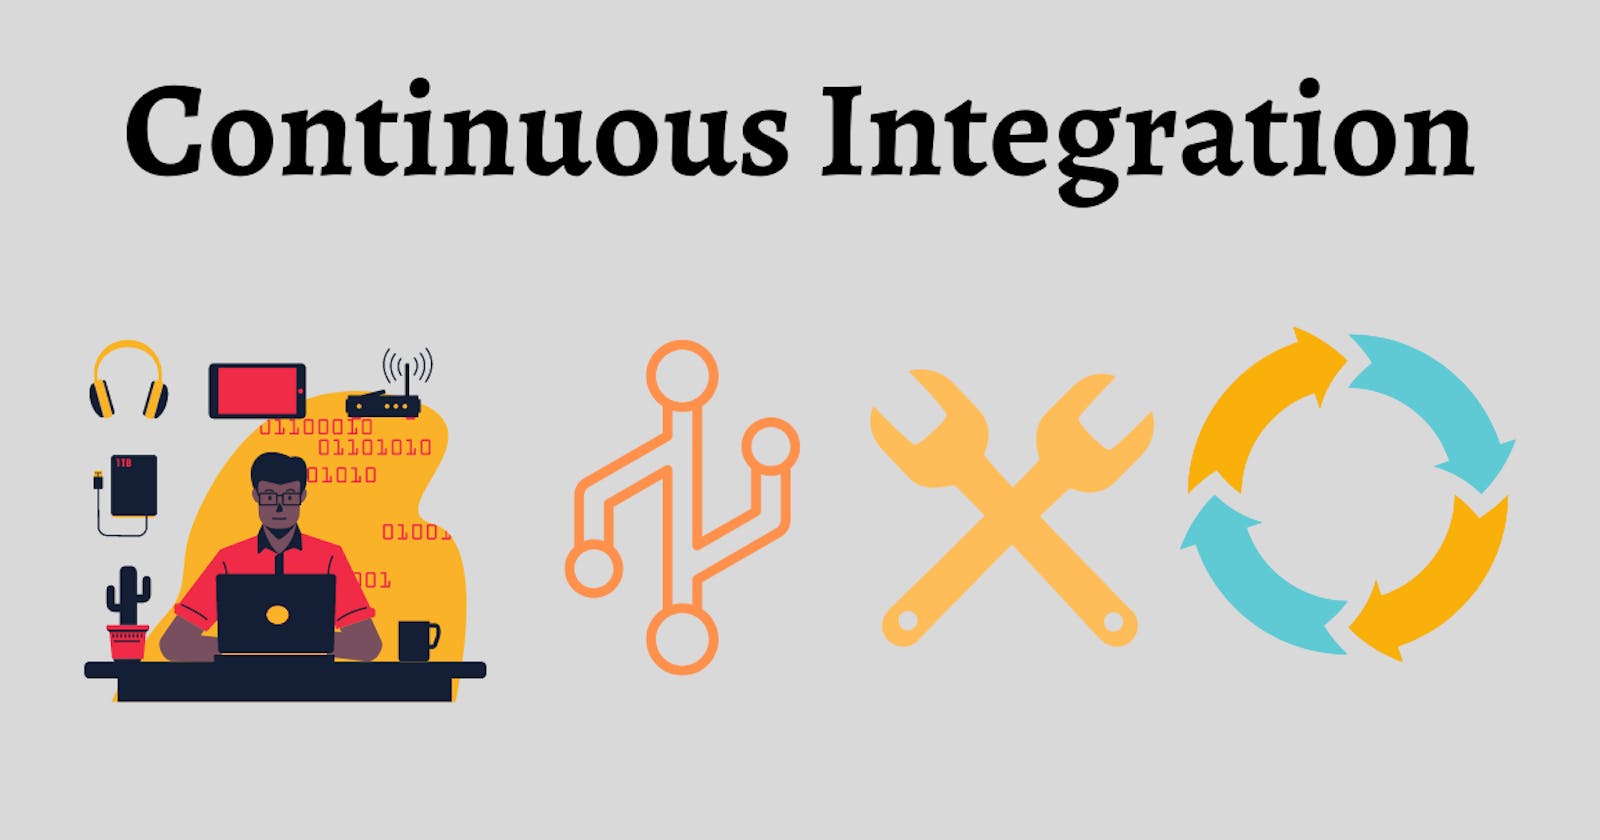 What Does "Continous Integration" Mean?